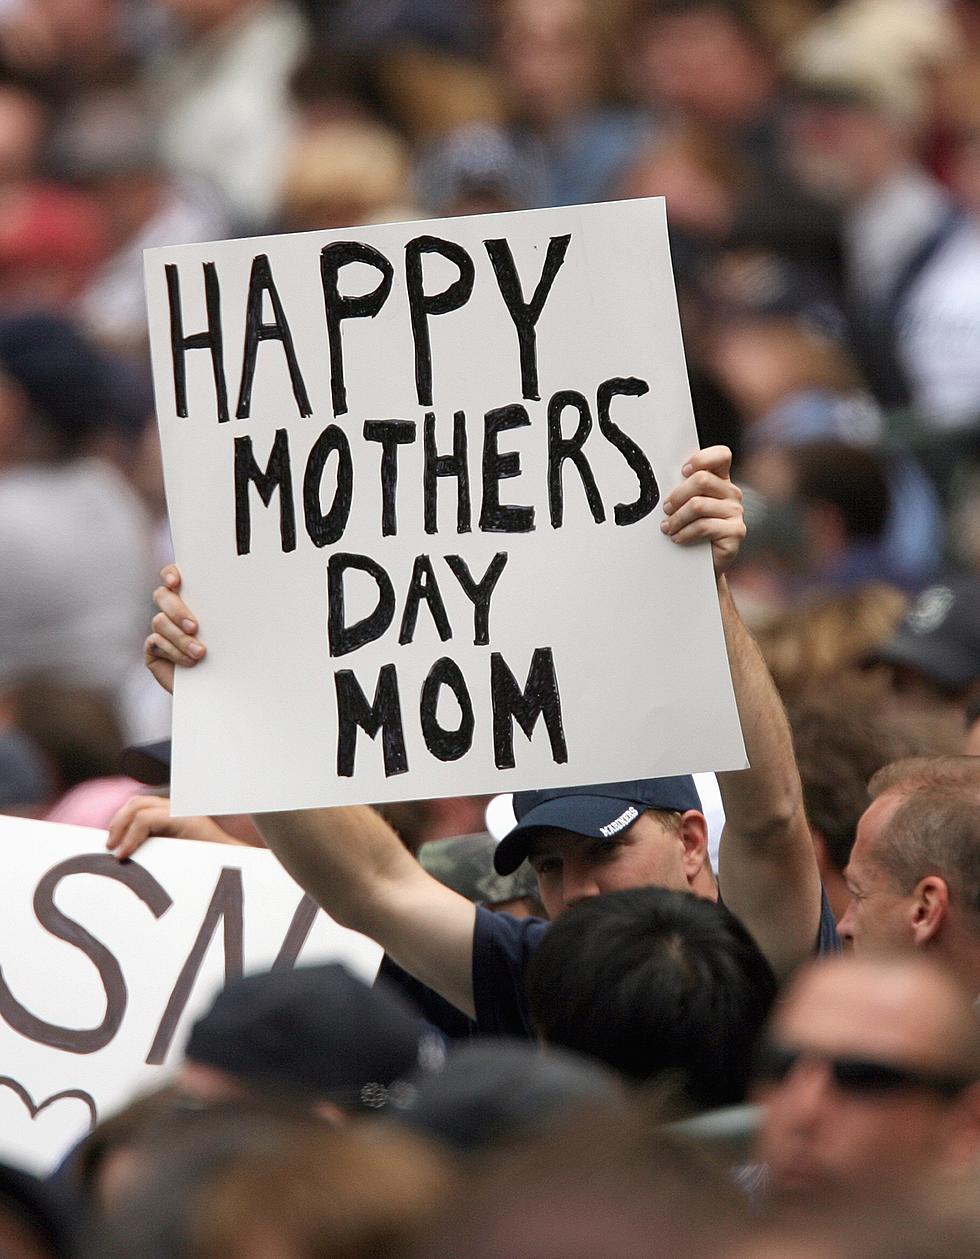 The Top 10 Best Gift Ideas For Mother's Day